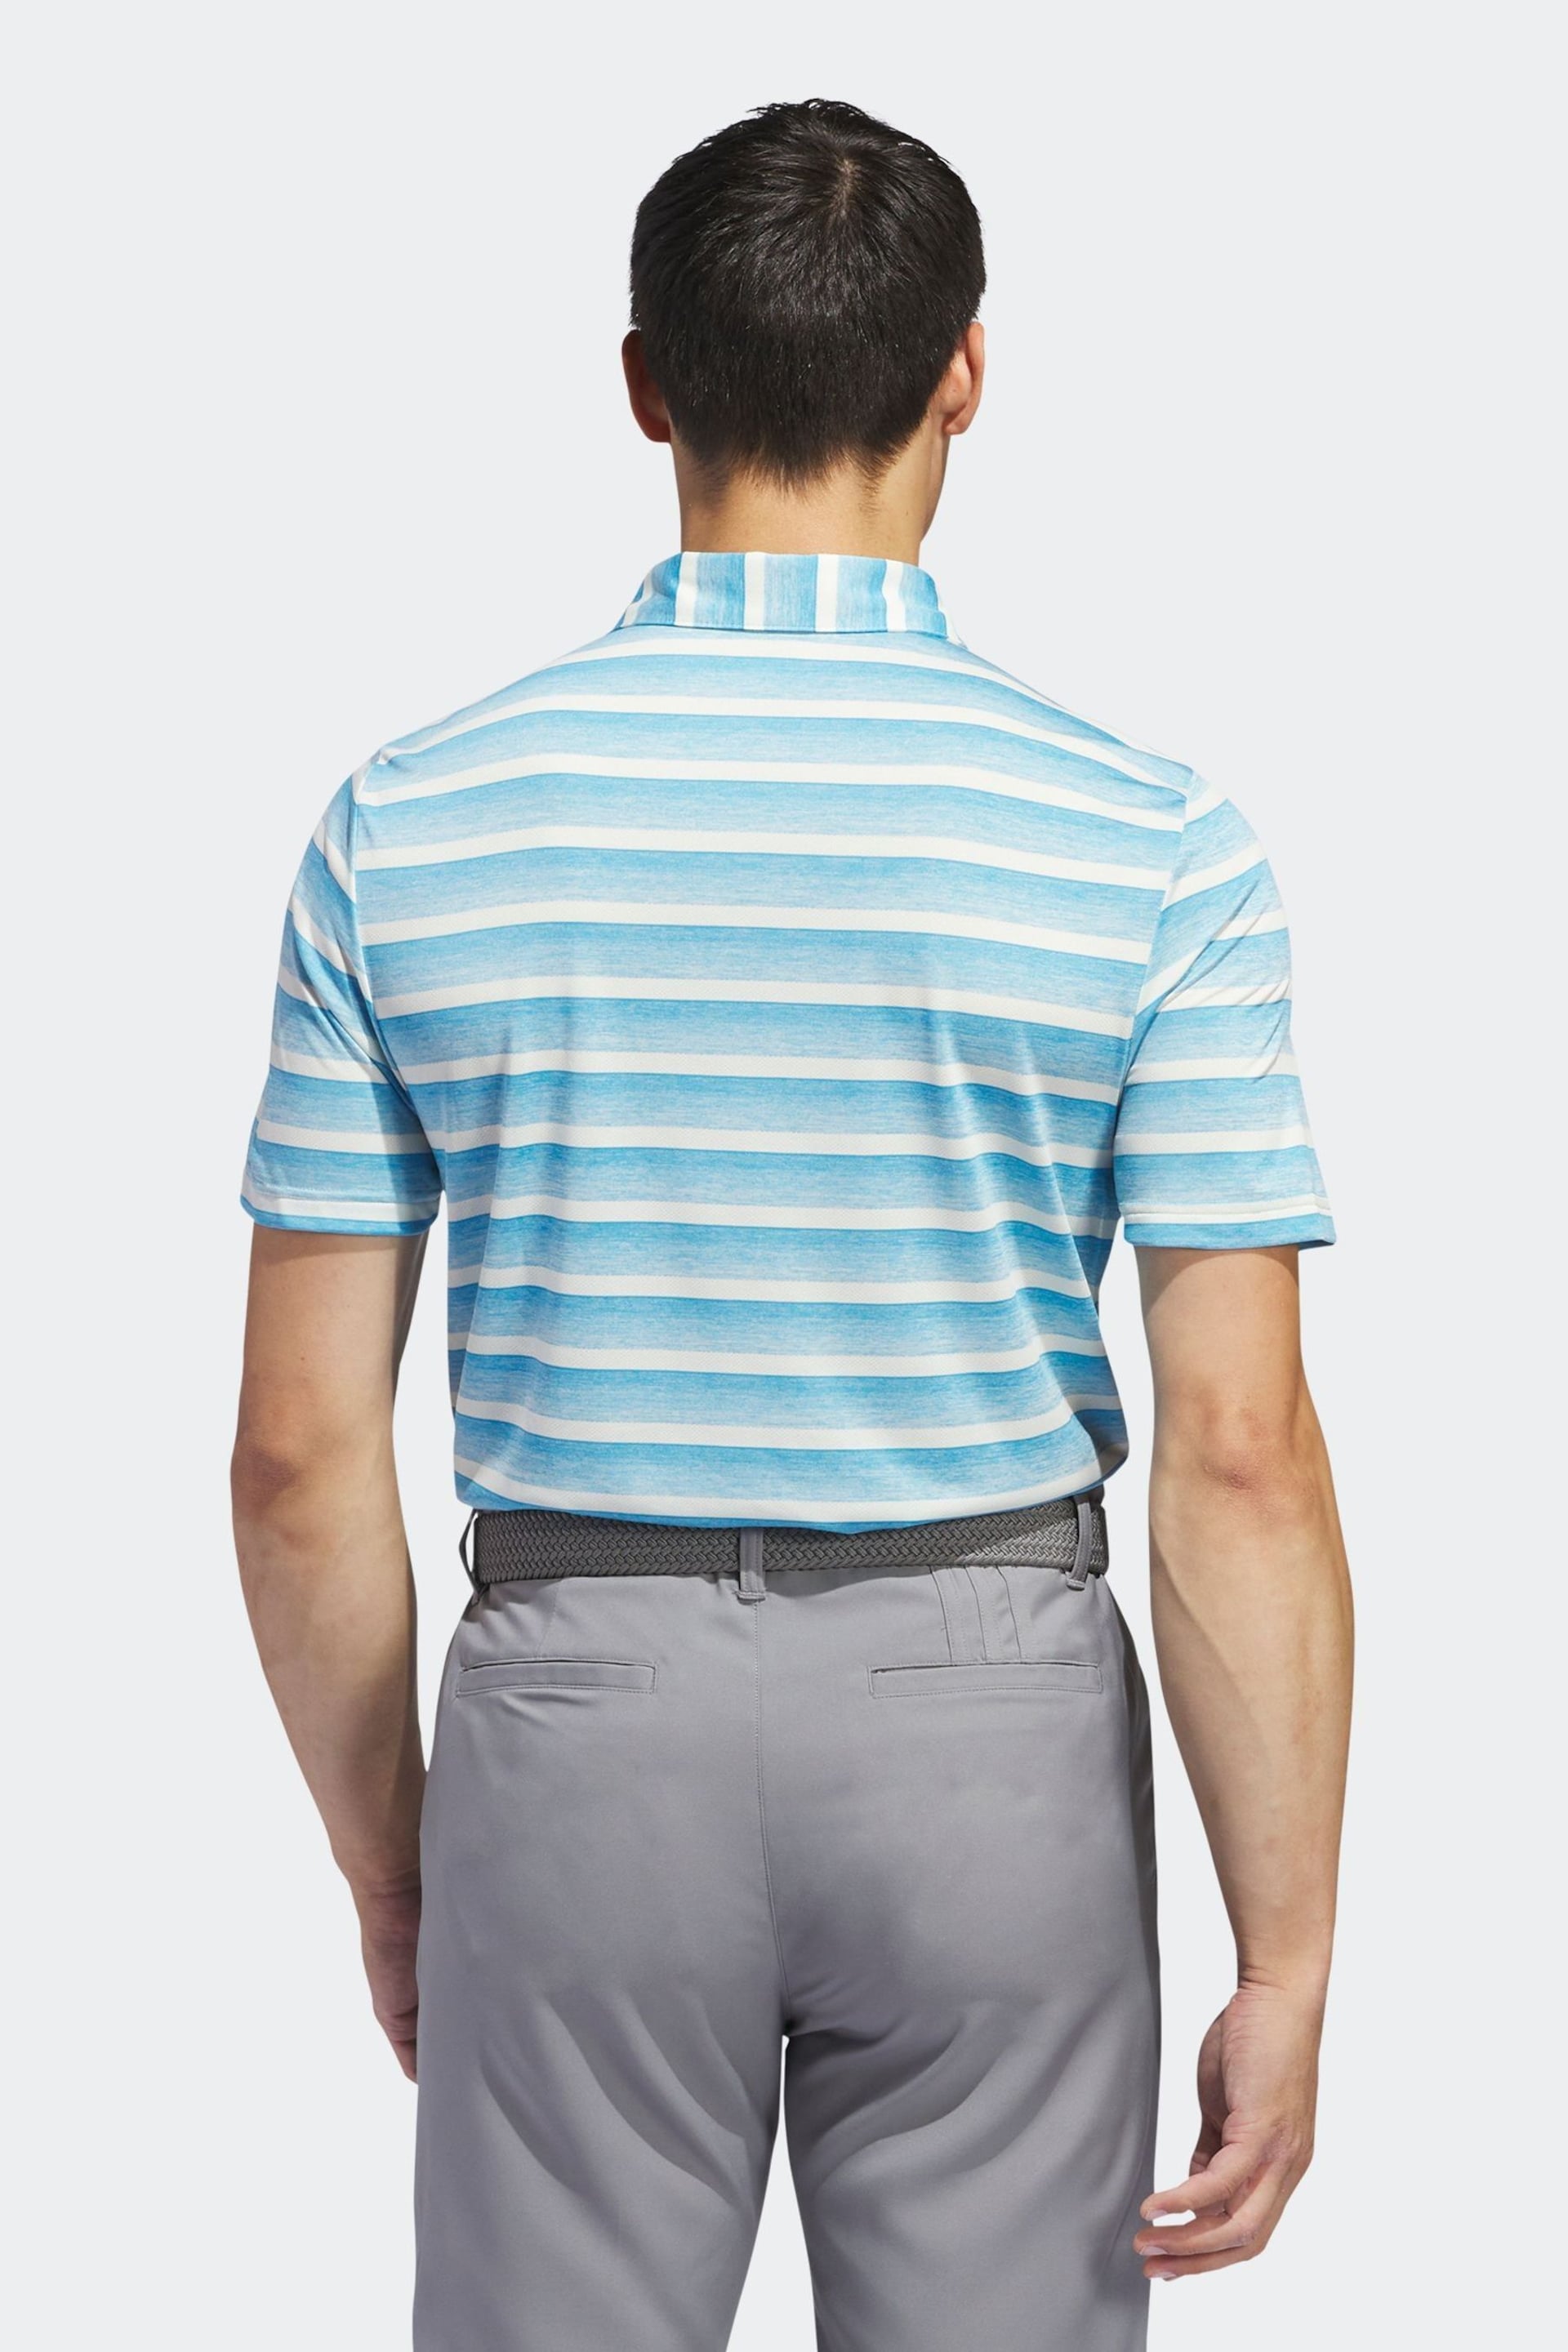 adidas Golf Two Colour Striped Polo Shirt - Image 2 of 7